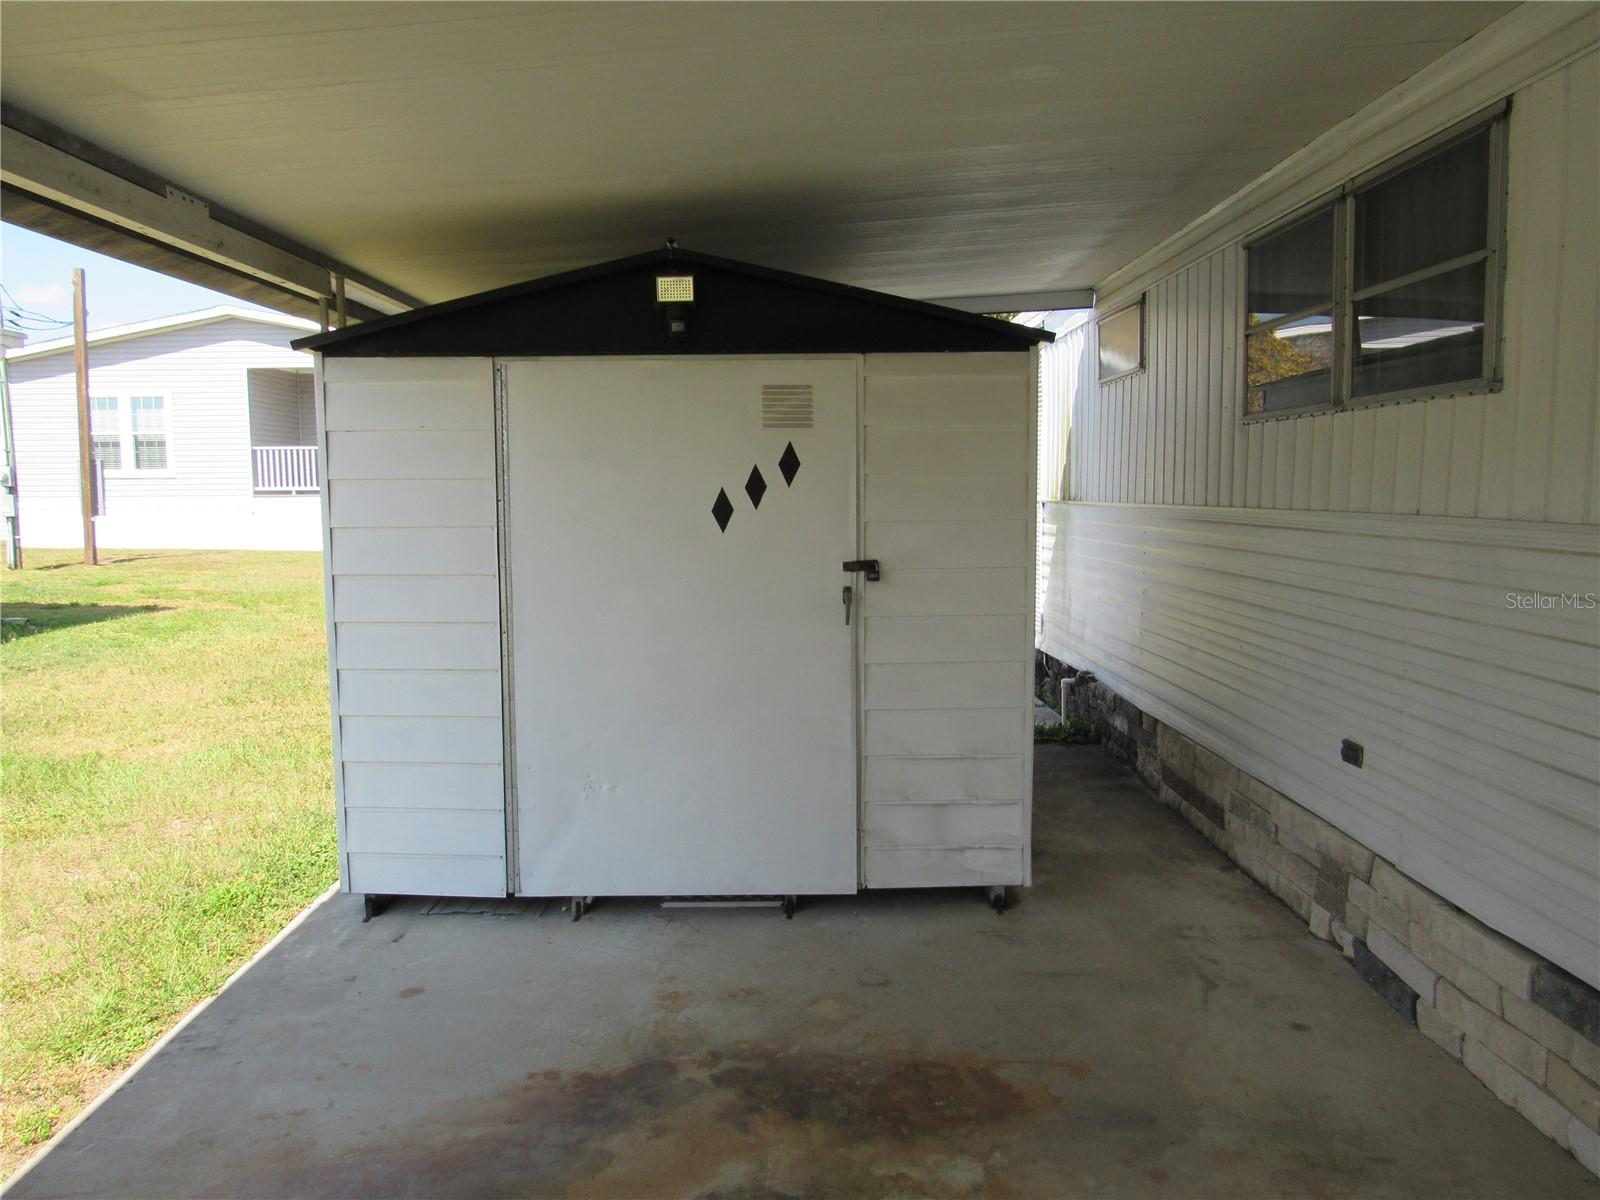 Laundry shed with washer/dryer/laundry tub.